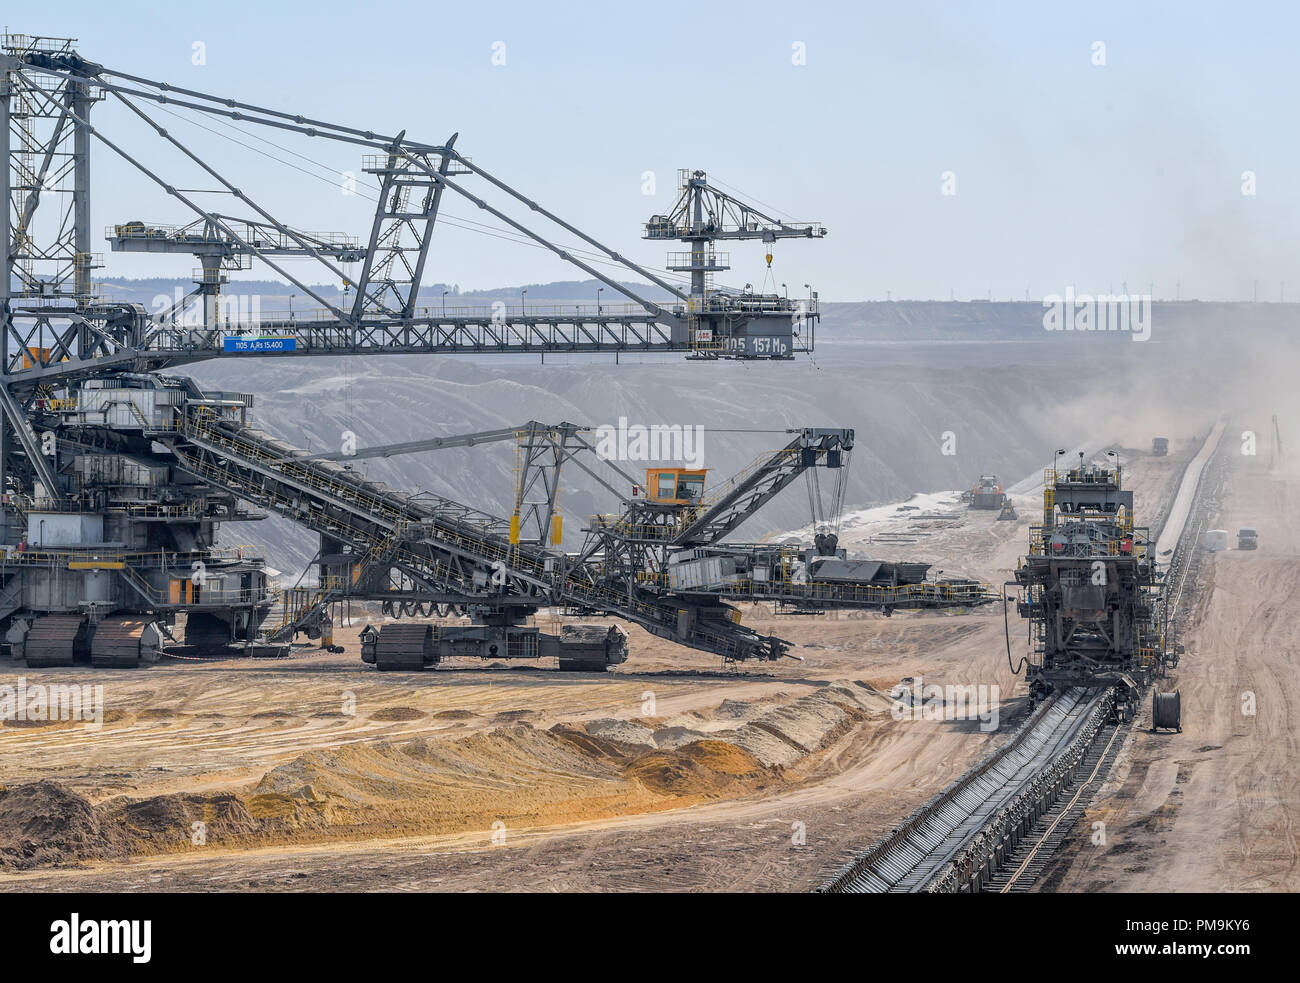 Welzow, Brandenburg. 17th Sep, 2018. A spreader can be seen at the edge of the Welzow Süd opencast lignite mine of LEAG (Lausitz Energie Bergbau AG) in front of huge slag heaps. The village of Proschim, only a few kilometres away, is to be dredged for the Welzow South opencast lignite mine. Residents and environmental associations have been defending themselves against this for many years. The Coal Commission will meet again in Berlin on 18.09.2018. Credit: Patrick Pleul/dpa-Zentralbild/ZB/dpa/Alamy Live News Stock Photo